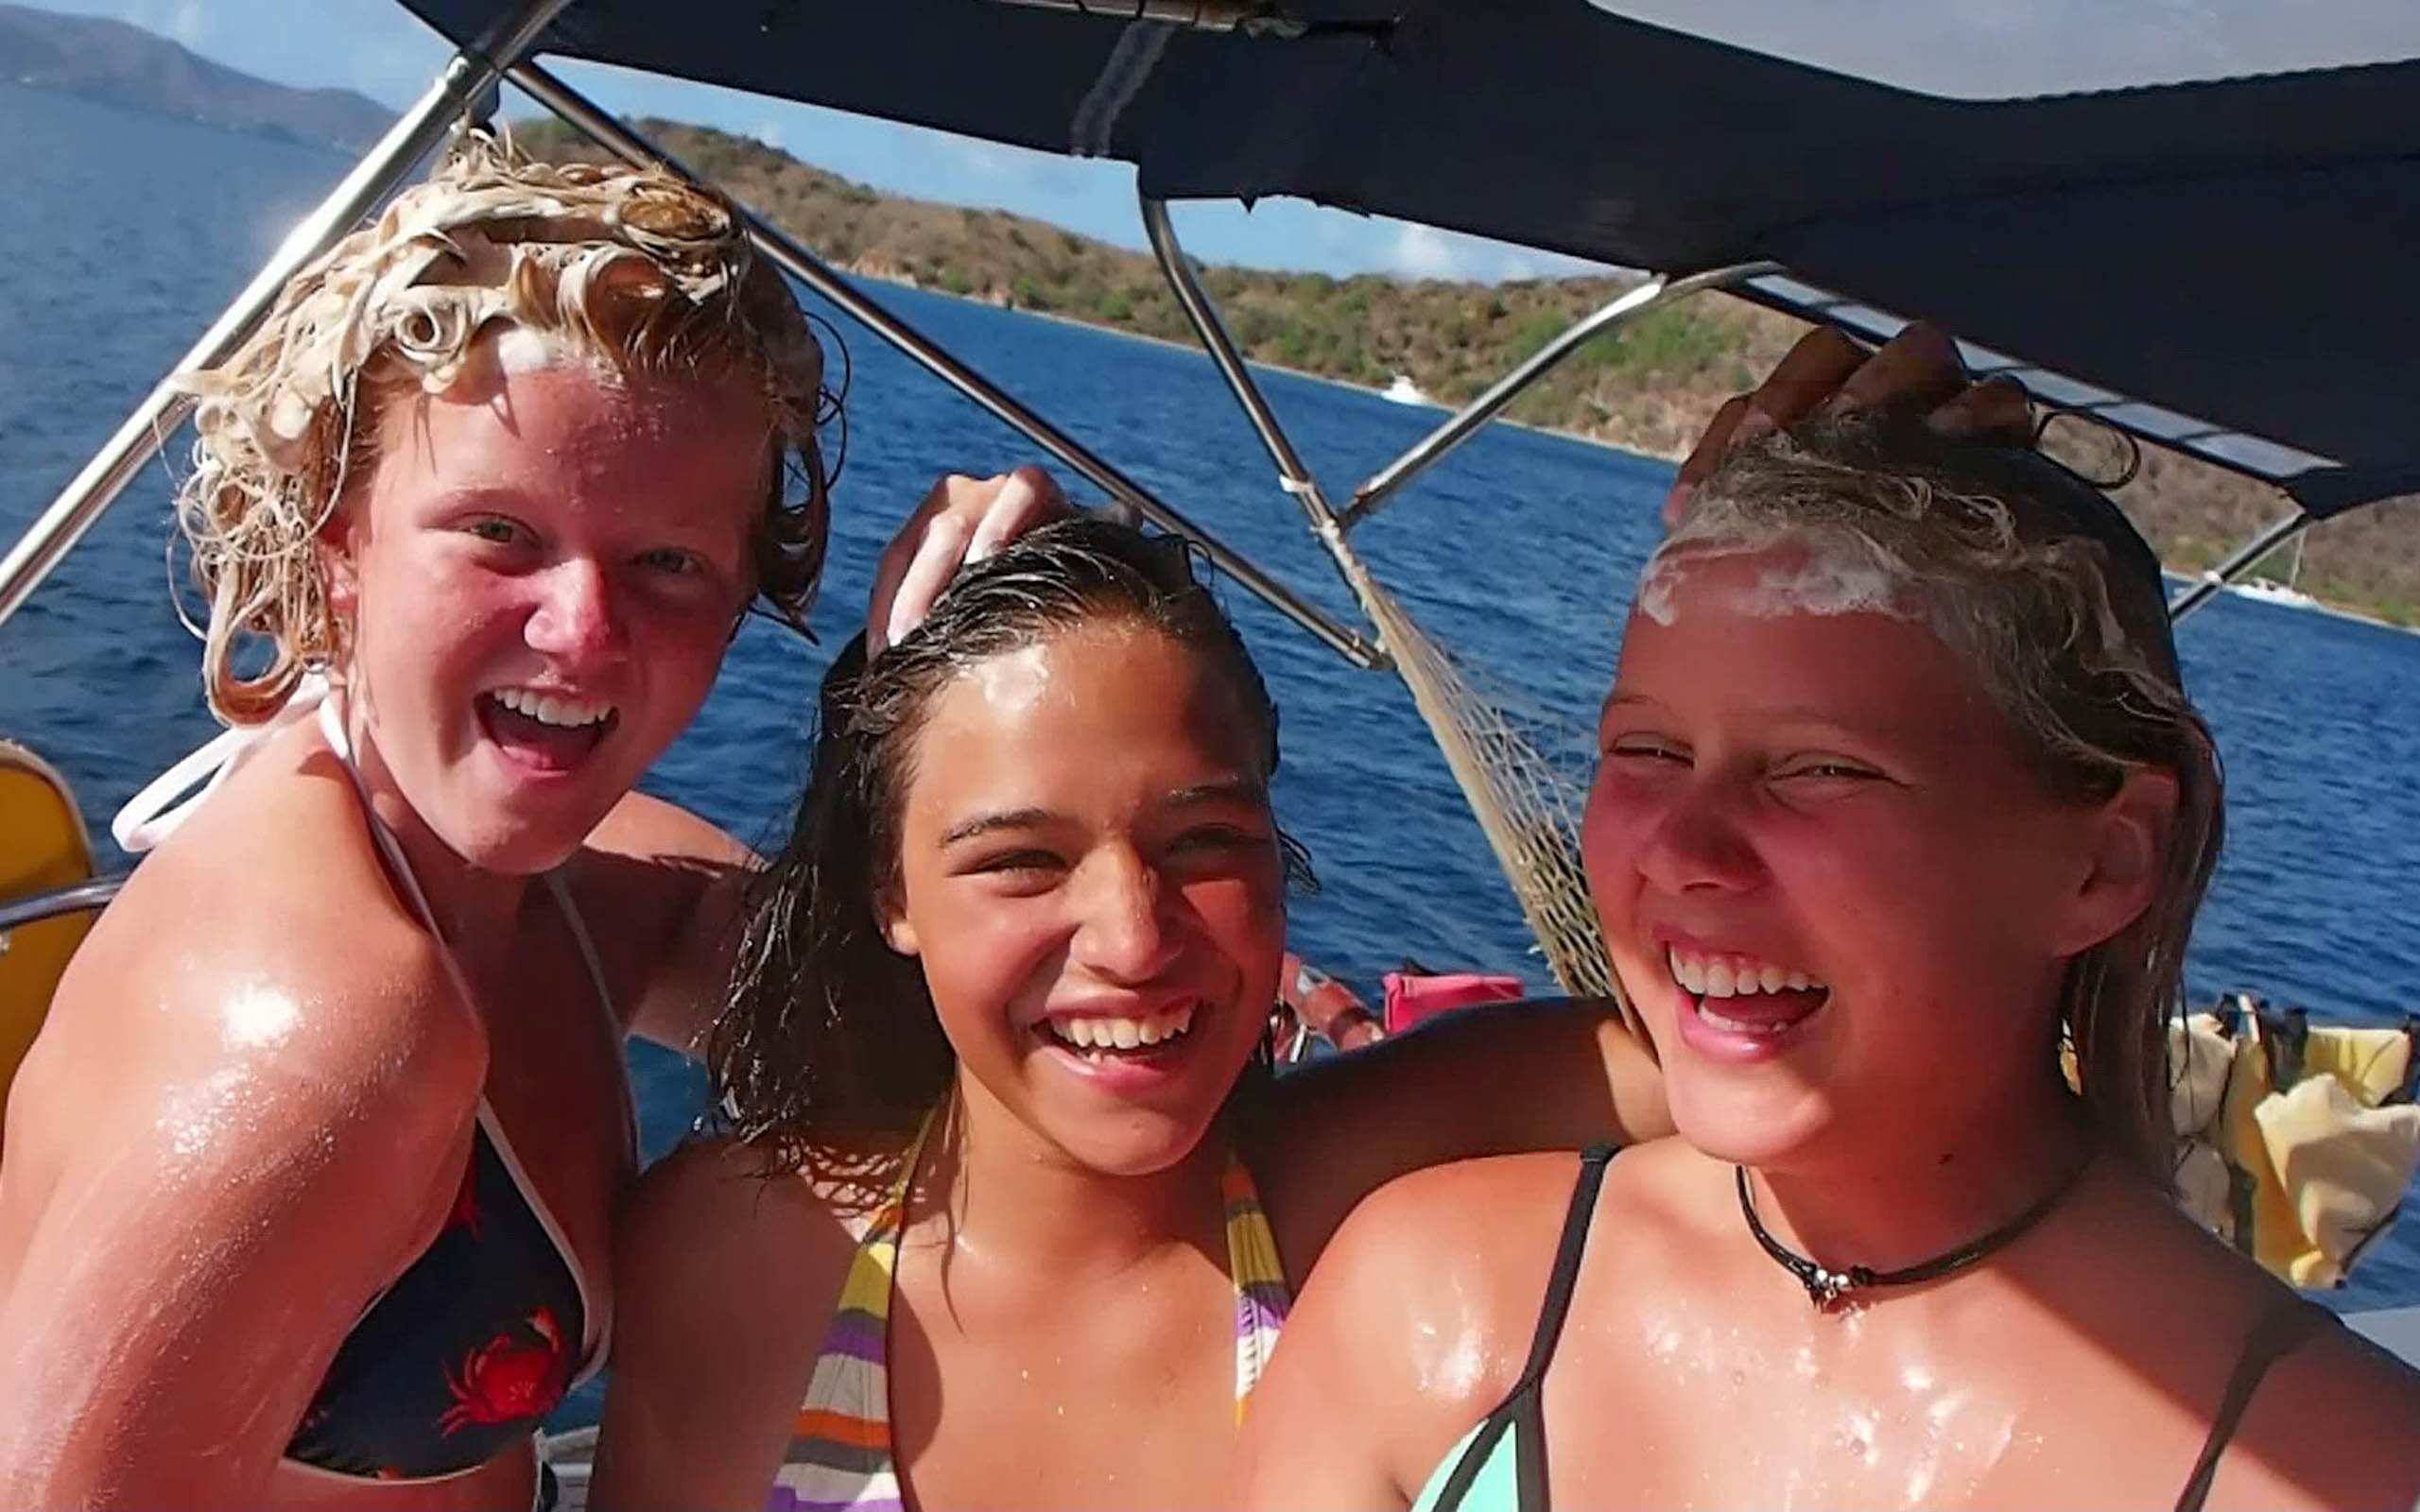 Three girls on a boat with their hair wet.